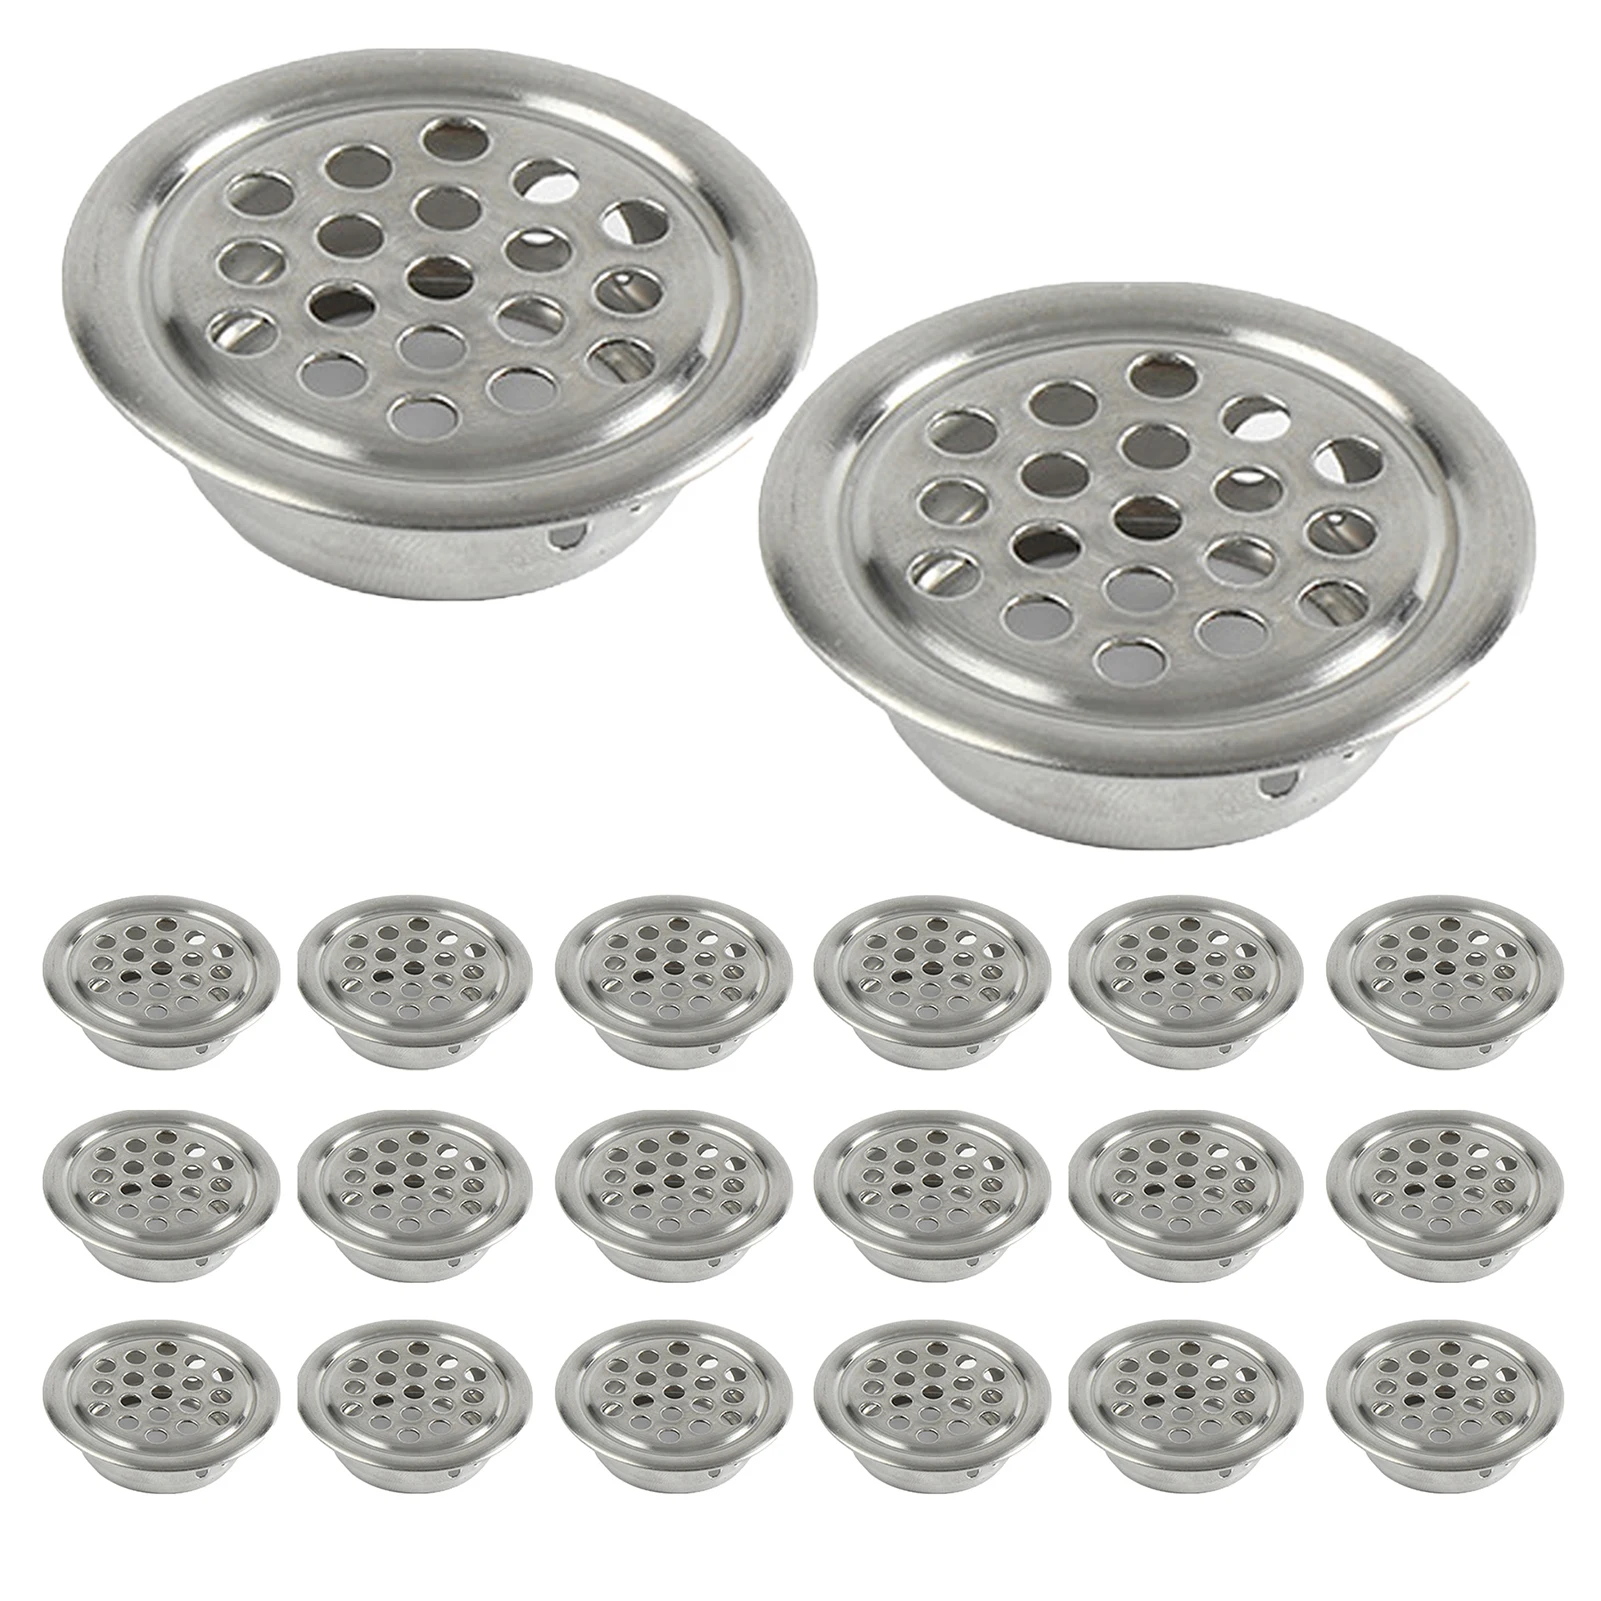 

20pcs/pack Cabinet Ventilation Easy Install Wardrobe Kitchen Stainless Steel For Bathroom Circular Mesh Hole Round Vent Grille